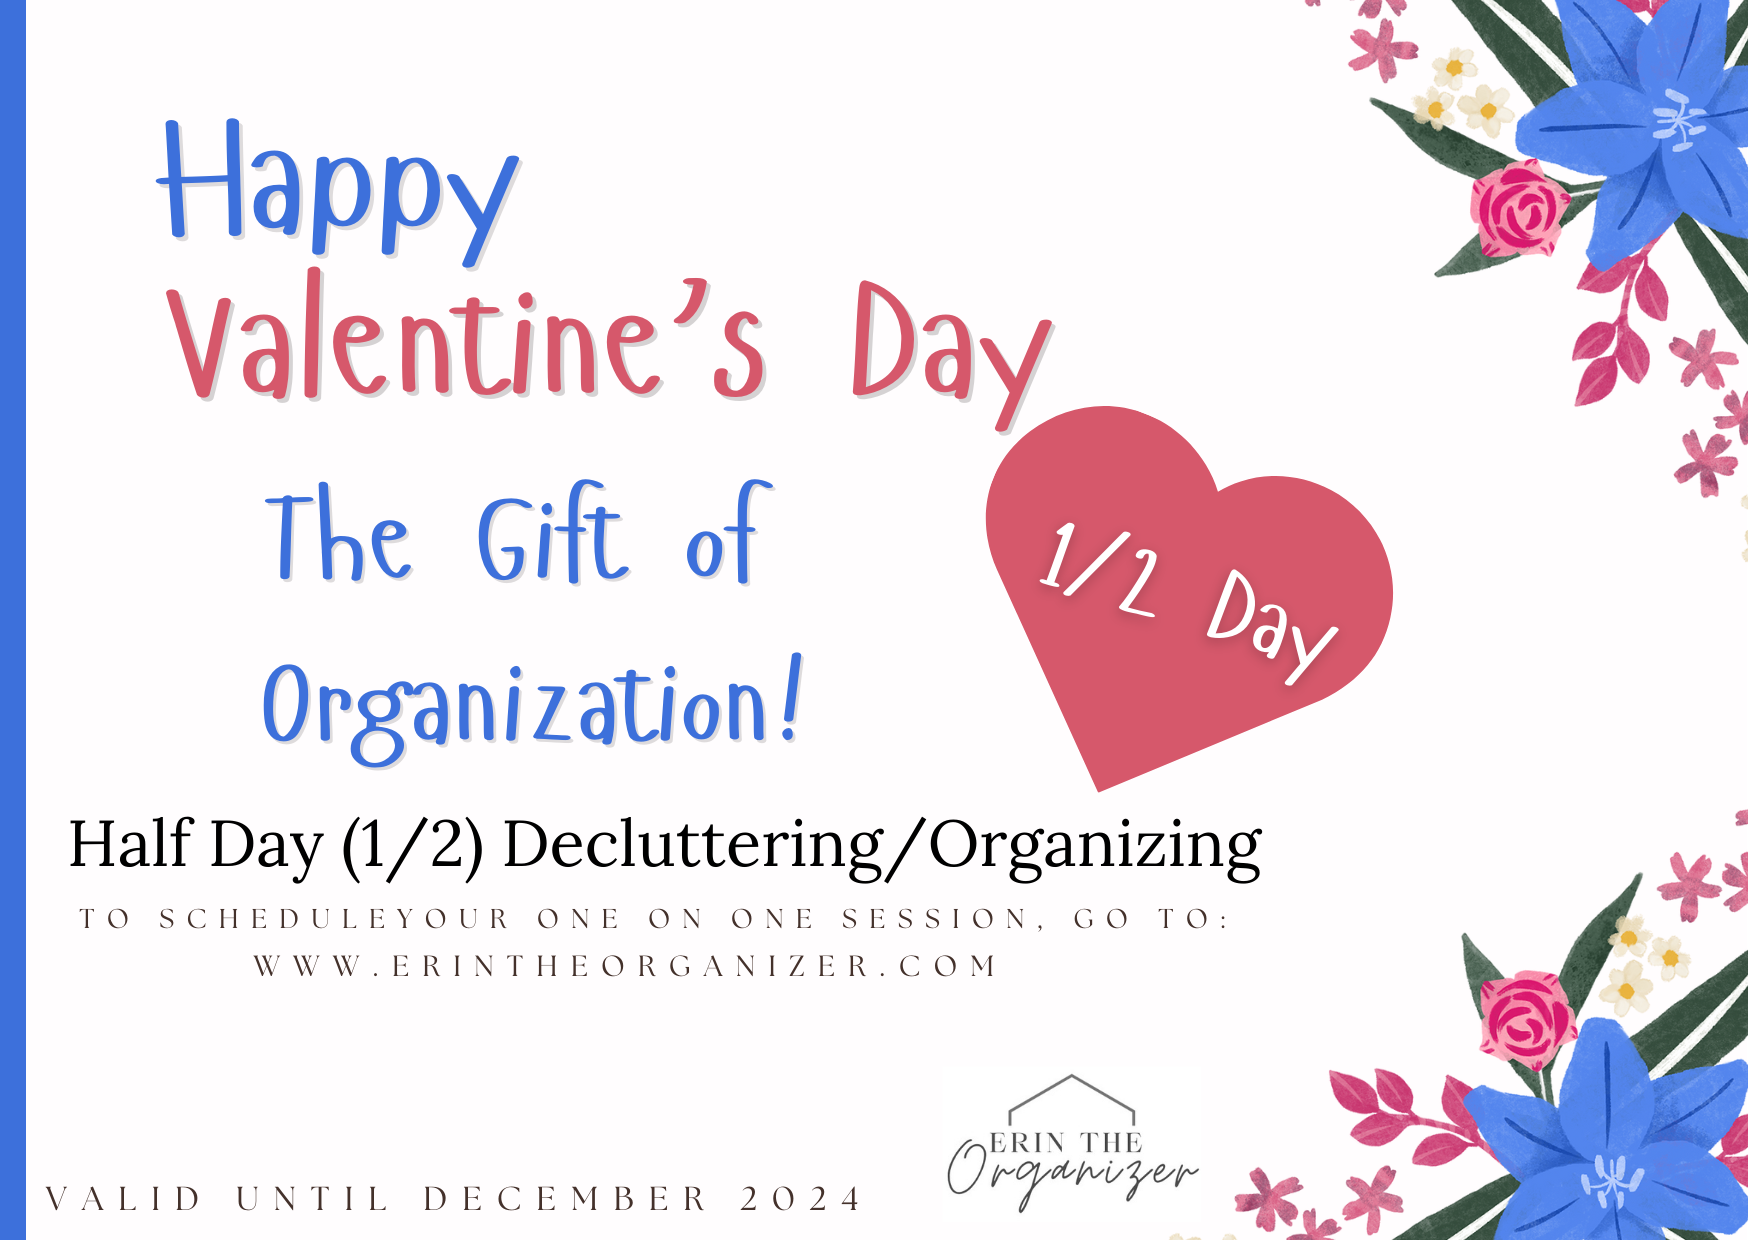 Erin The Organizer Gift Card $700 (Pay Only $500)